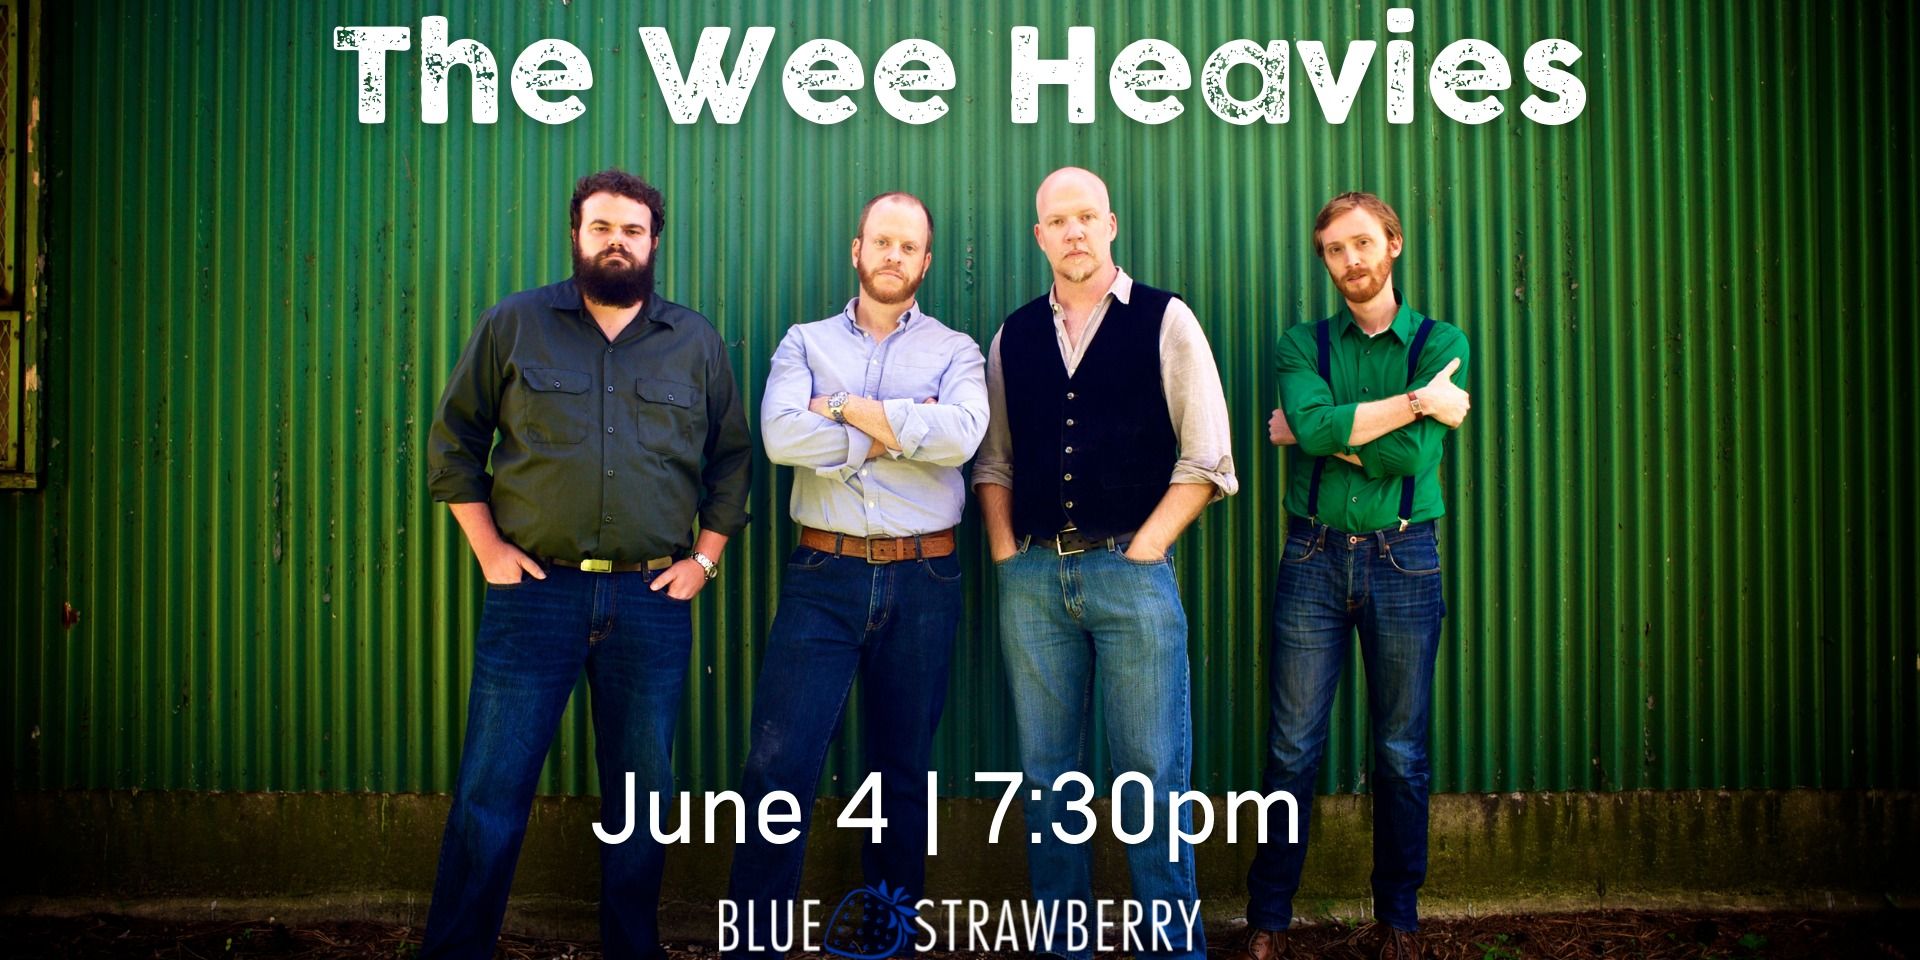 The Wee Heavies promotional image